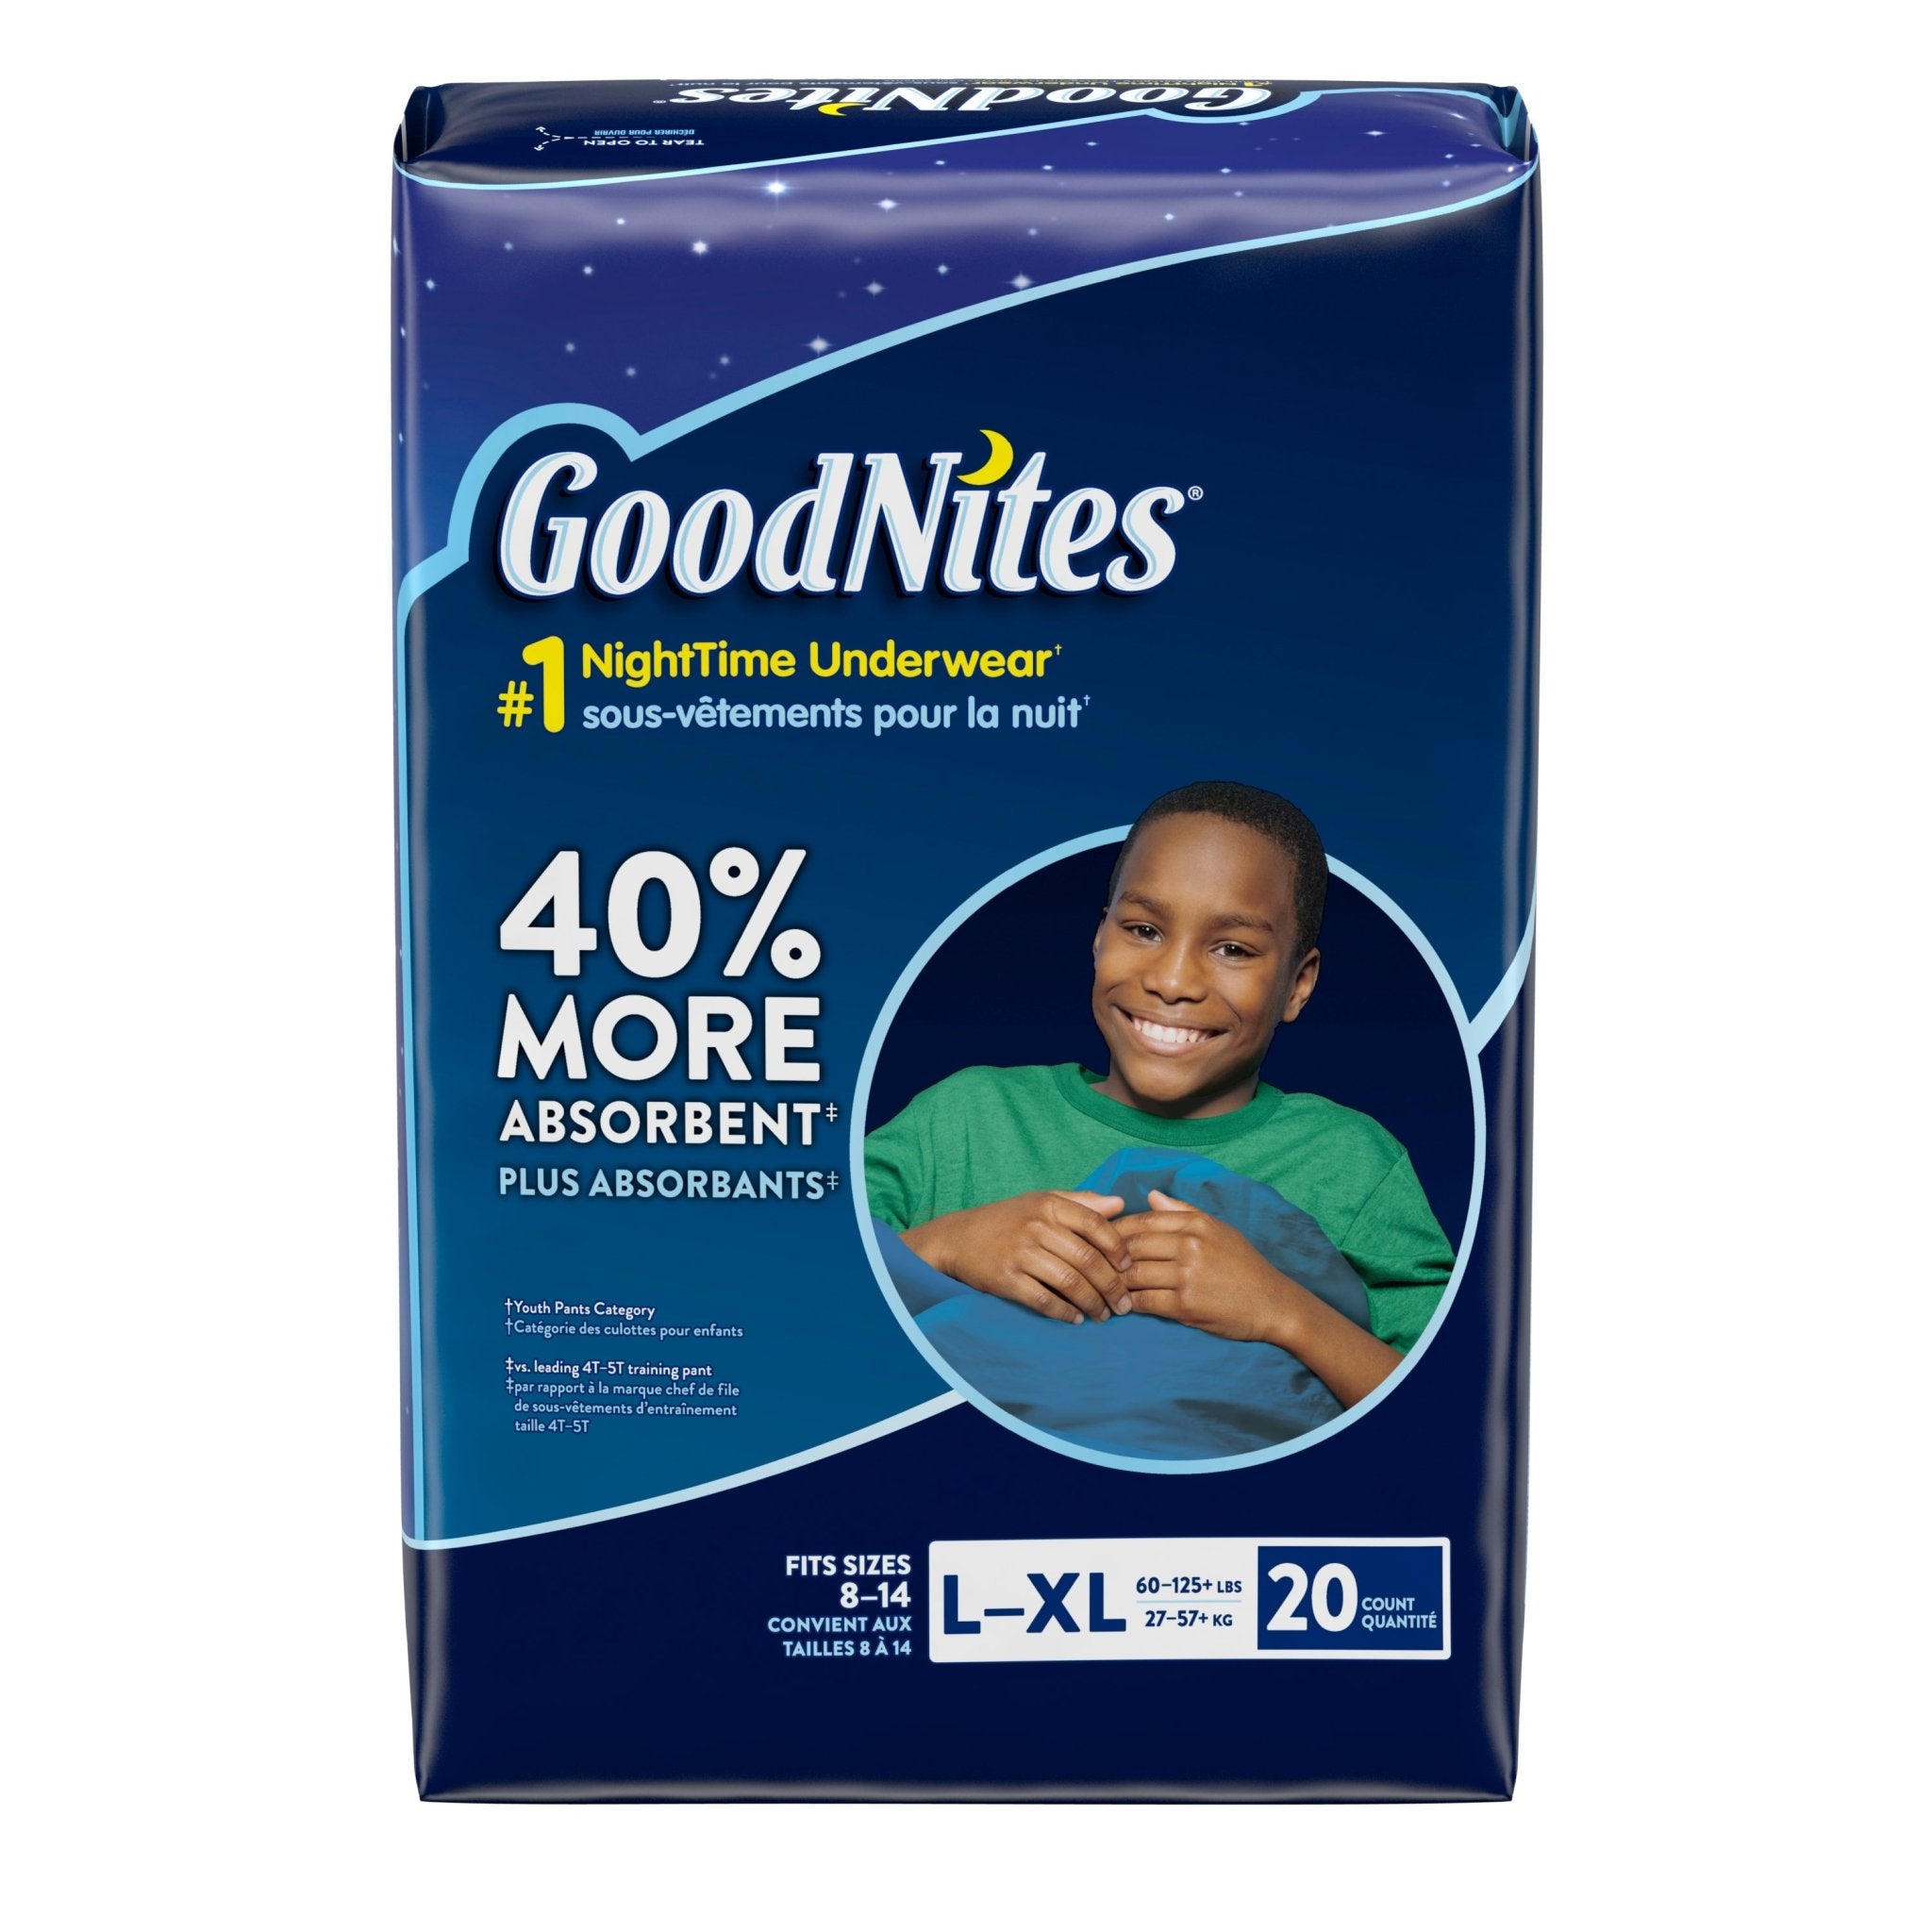 PK/20 - GoodNites Bedtime Bedwetting Underwear for Boys, L-XL, 20 Ct.  (Packaging May Vary) - MANUFACTURER DISCONTINUED - Best Buy Medical  Supplies